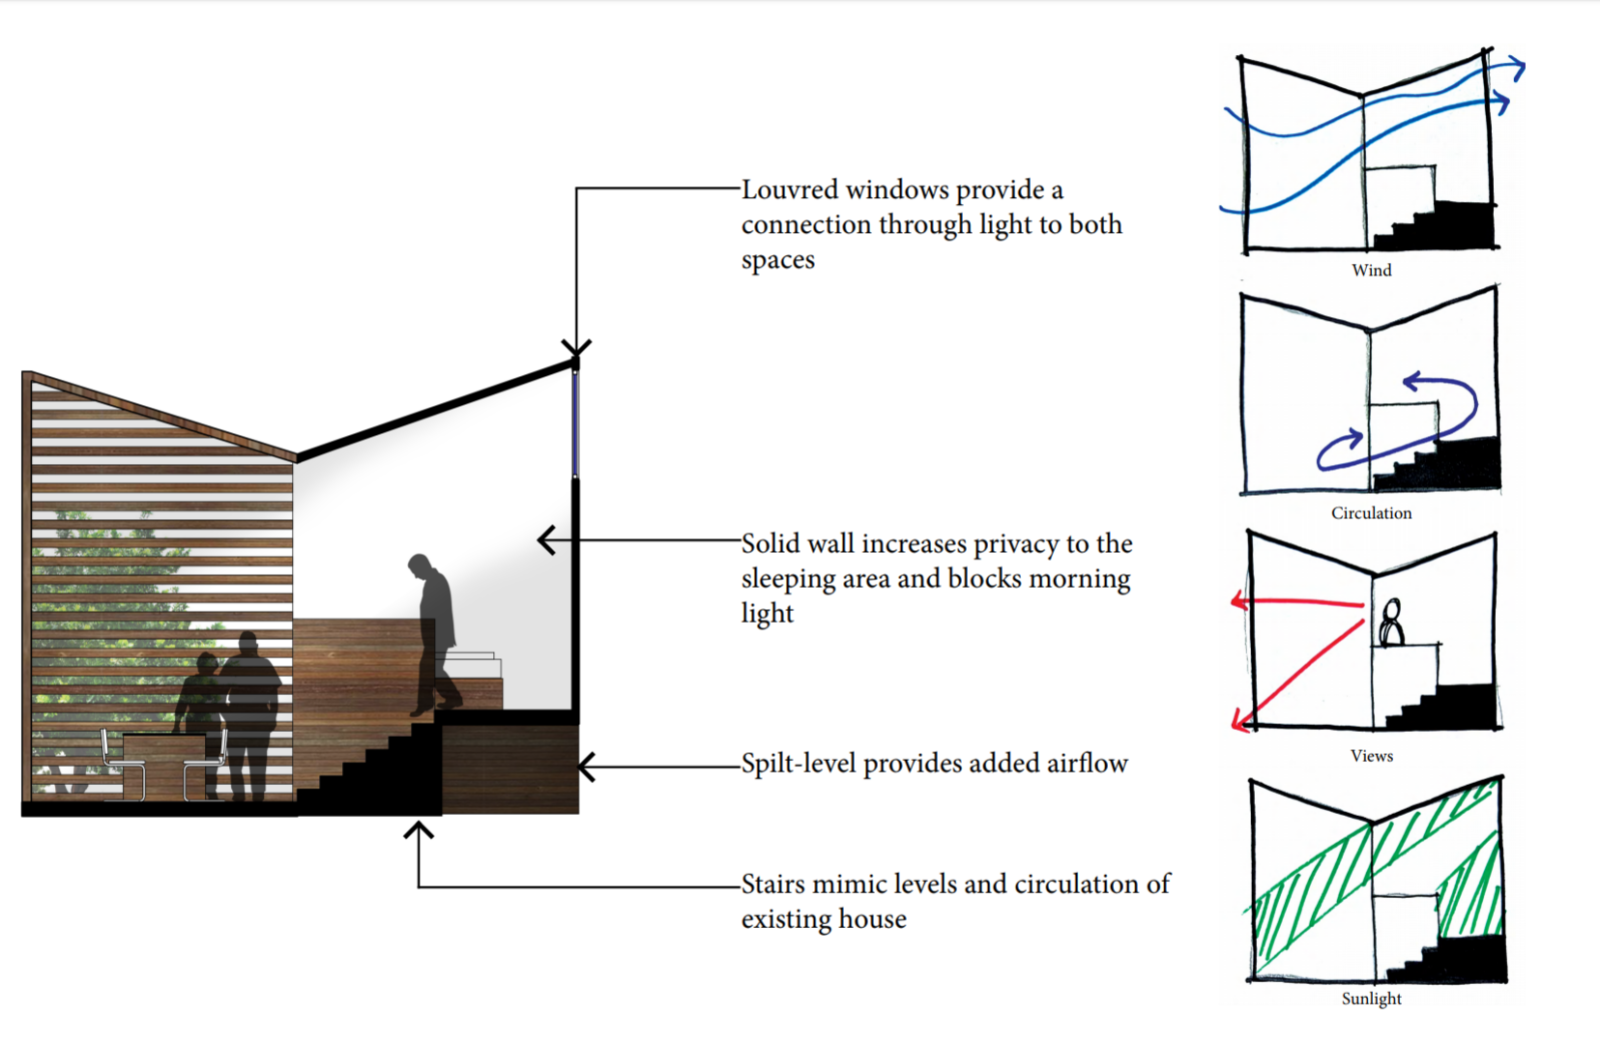 A section shows multiple diagrams on how the space interacts with light, people, and the site.